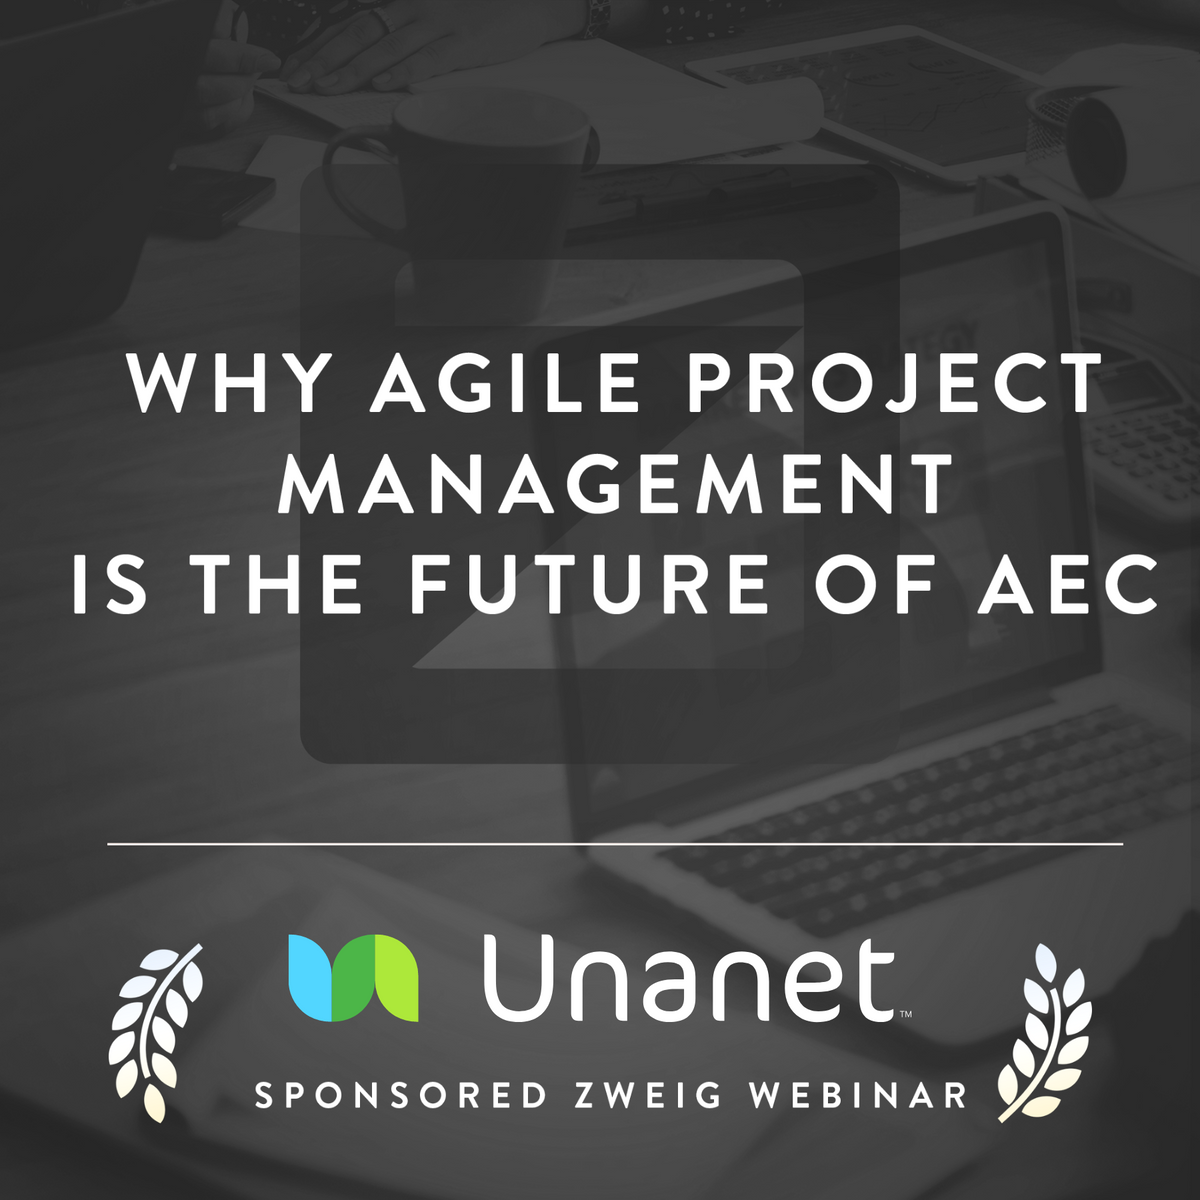 Why Agile Project Management is the Future of AEC - Unanet Sponsored Webinar Cover